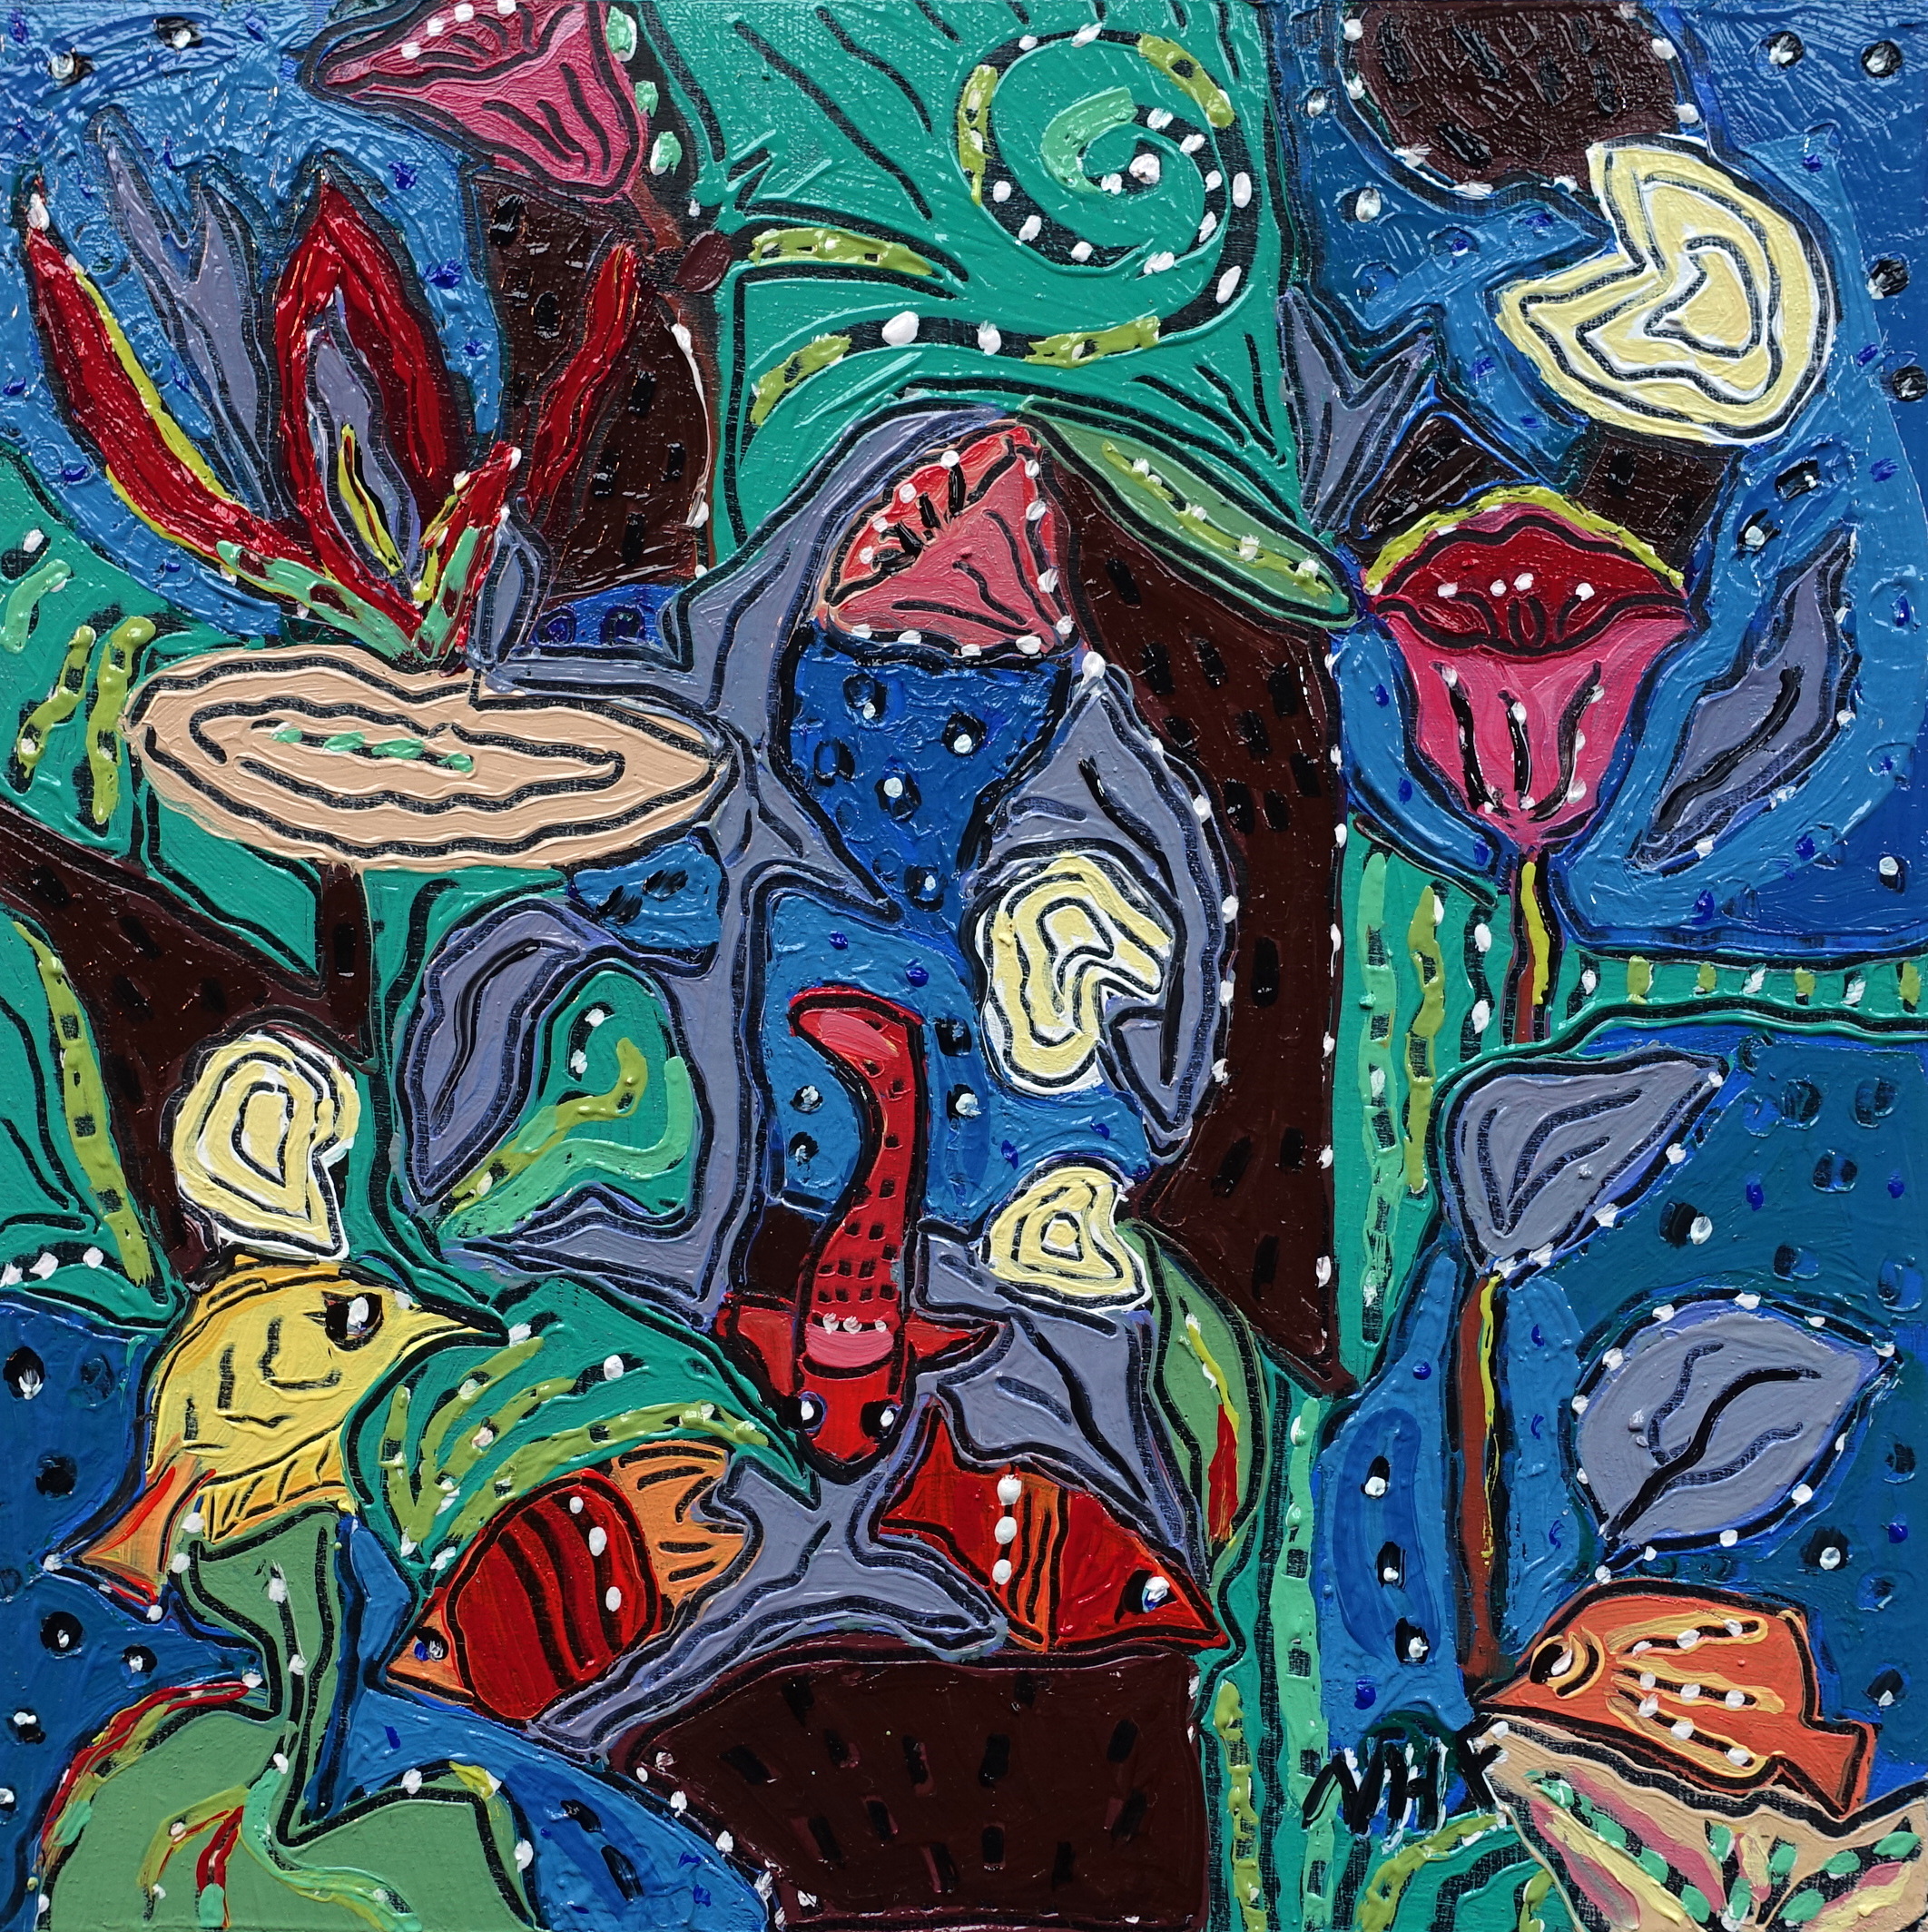   Swimming with Fishes 3 , oil on panel 8x8 